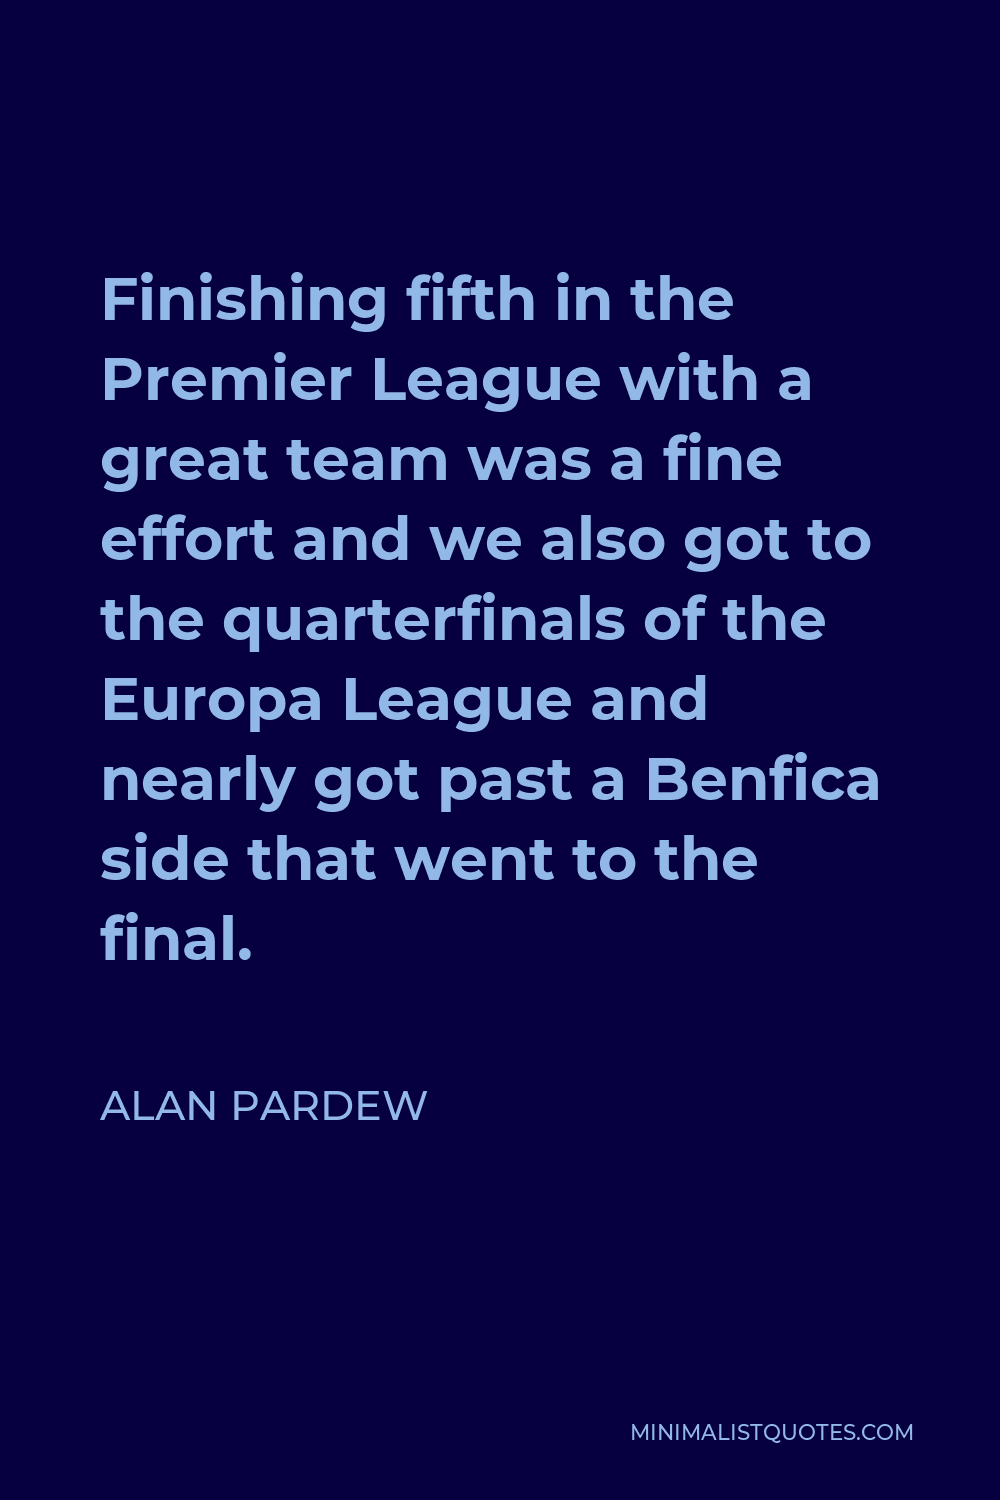 Alan Pardew Quote - Finishing fifth in the Premier League with a great team was a fine effort and we also got to the quarterfinals of the Europa League and nearly got past a Benfica side that went to the final.